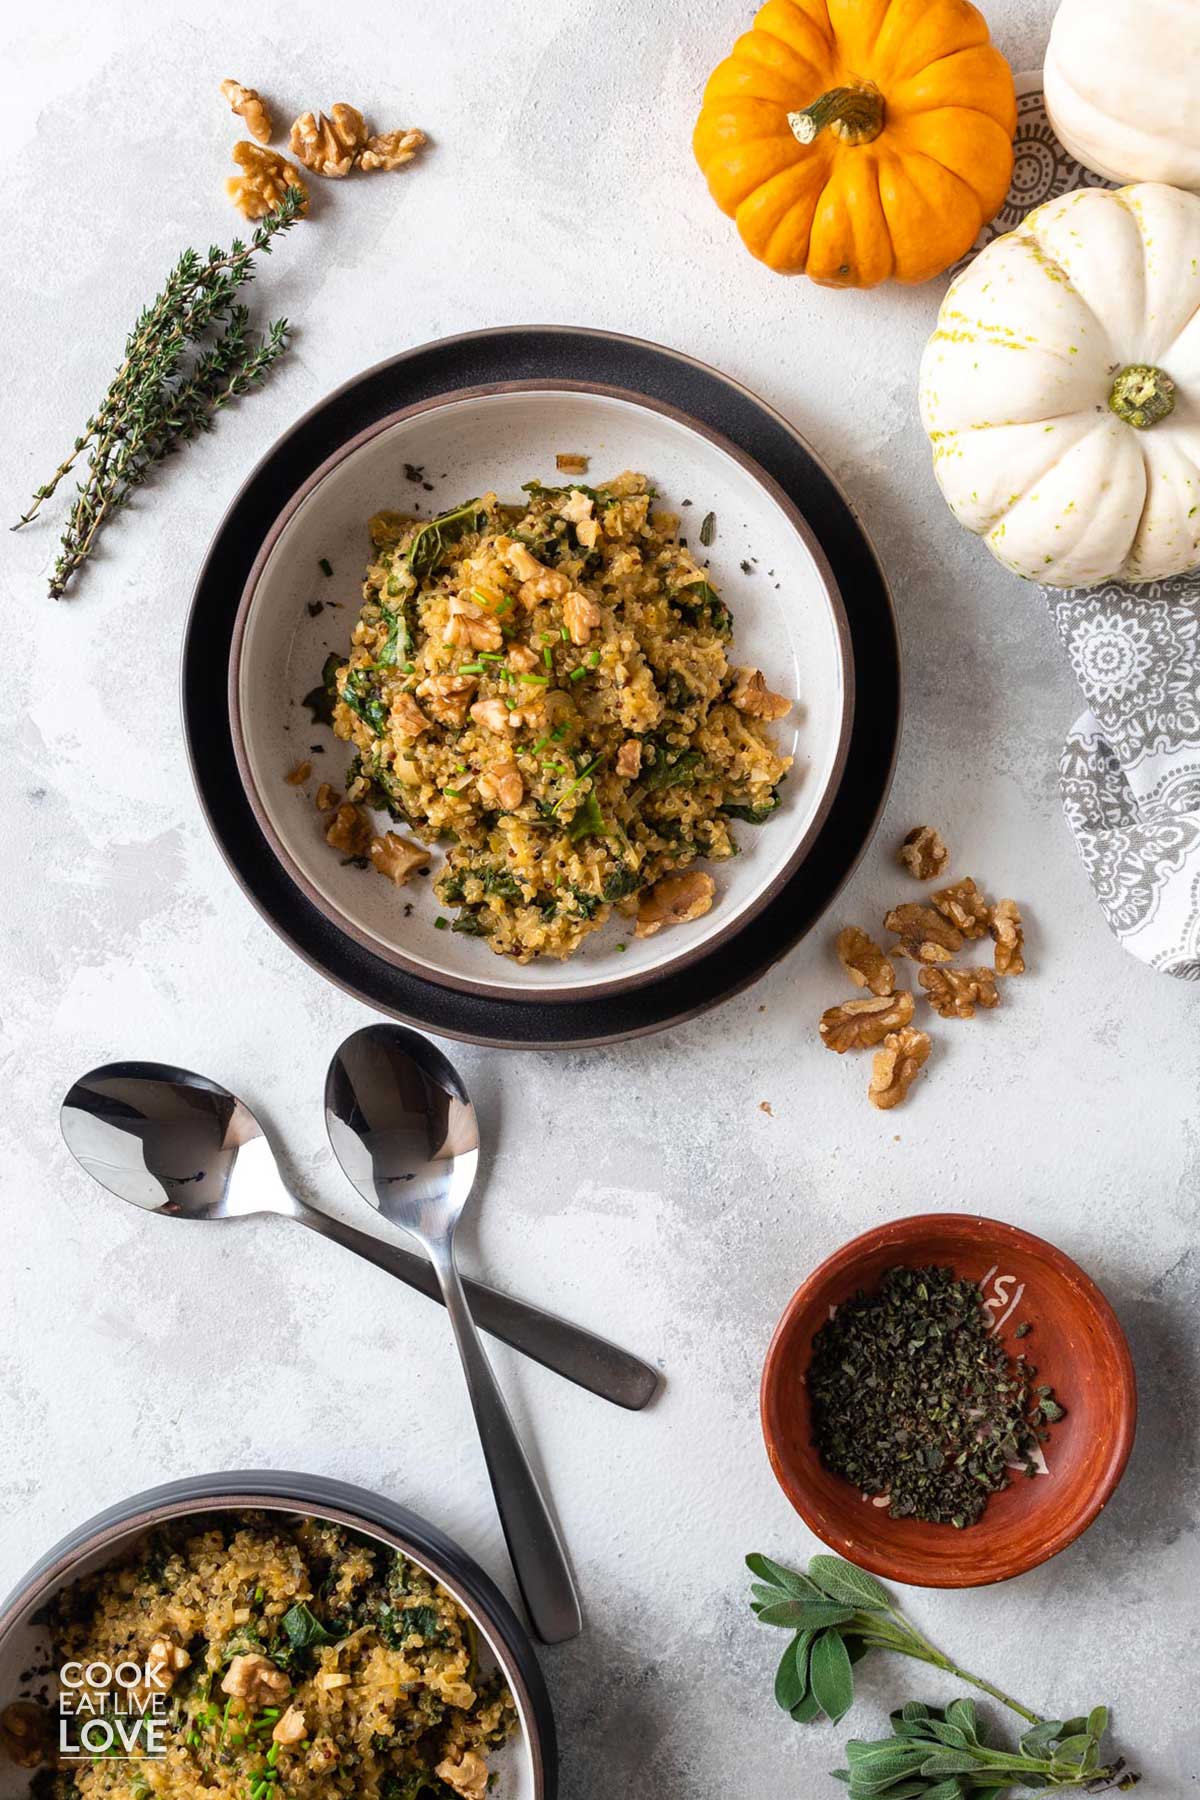 Quinoa risotto with kale and winter squash in bowls.